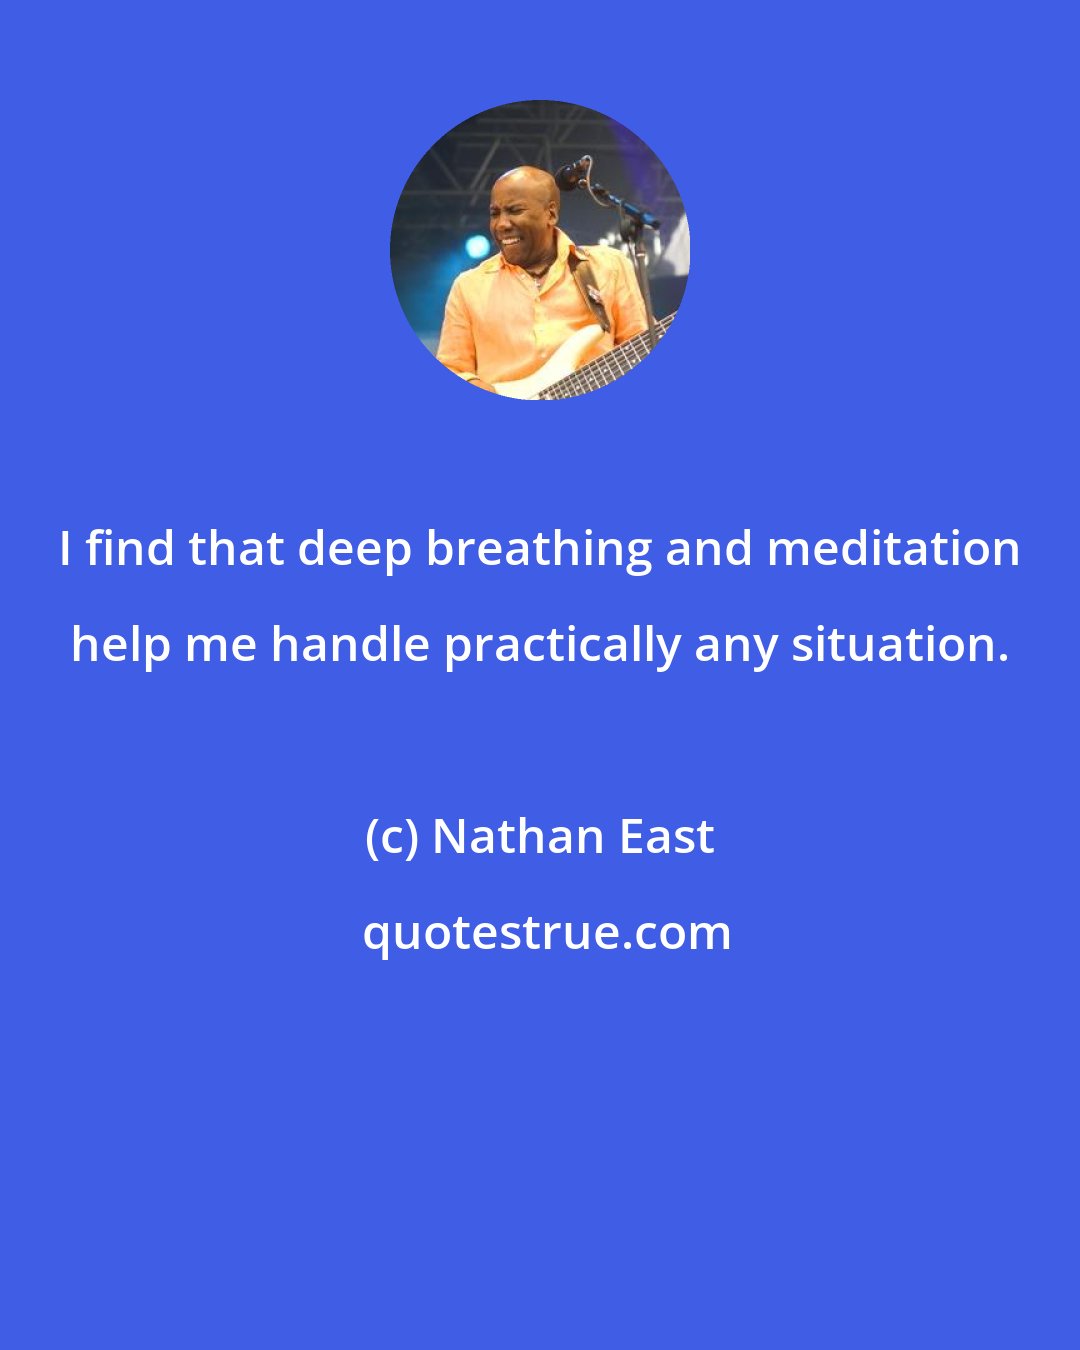 Nathan East: I find that deep breathing and meditation help me handle practically any situation.